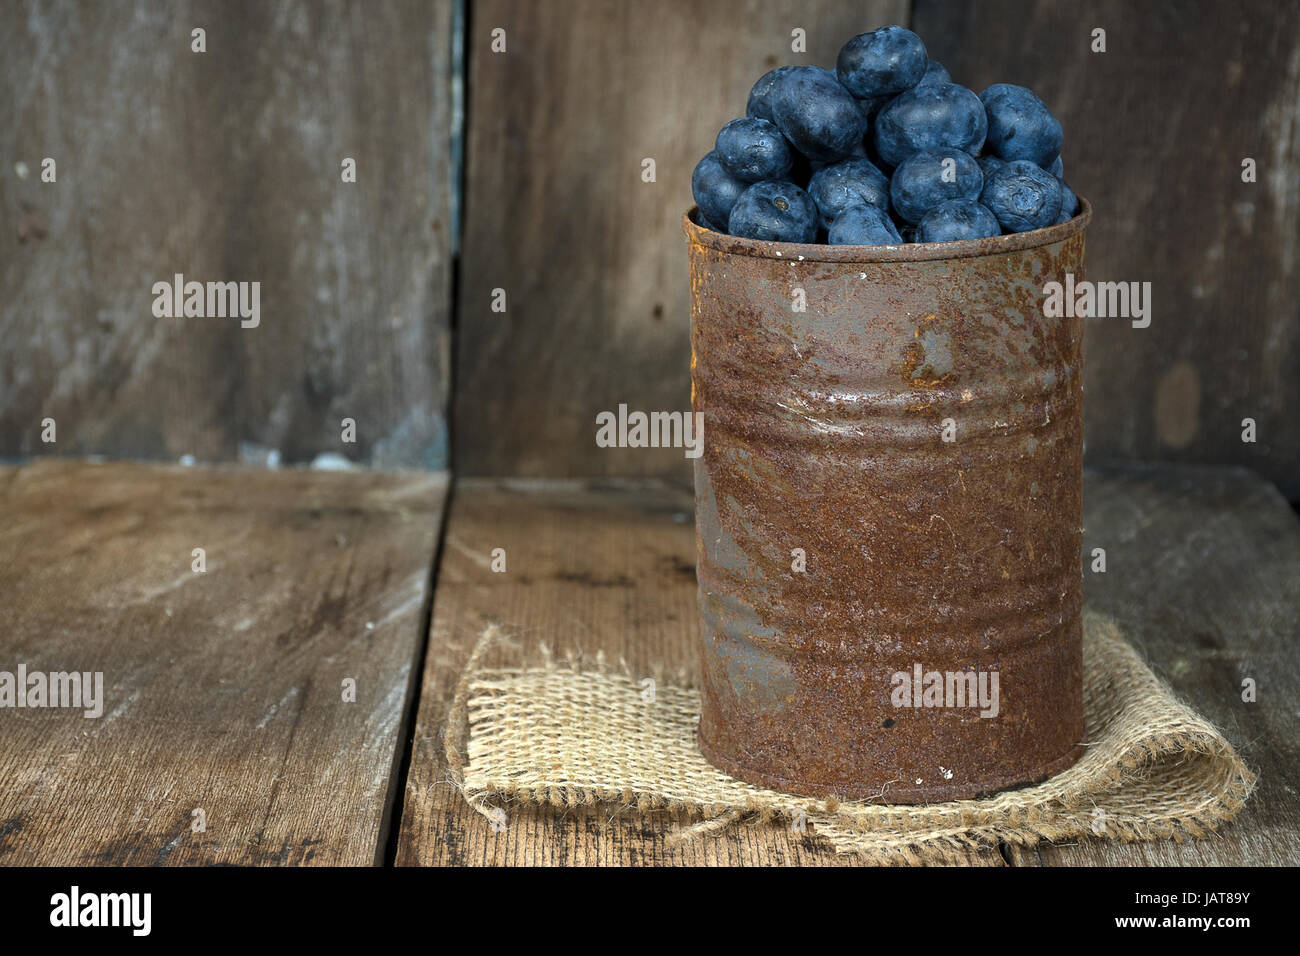 blueberries in rusty tin can on burlap and rustic wood Stock Photo